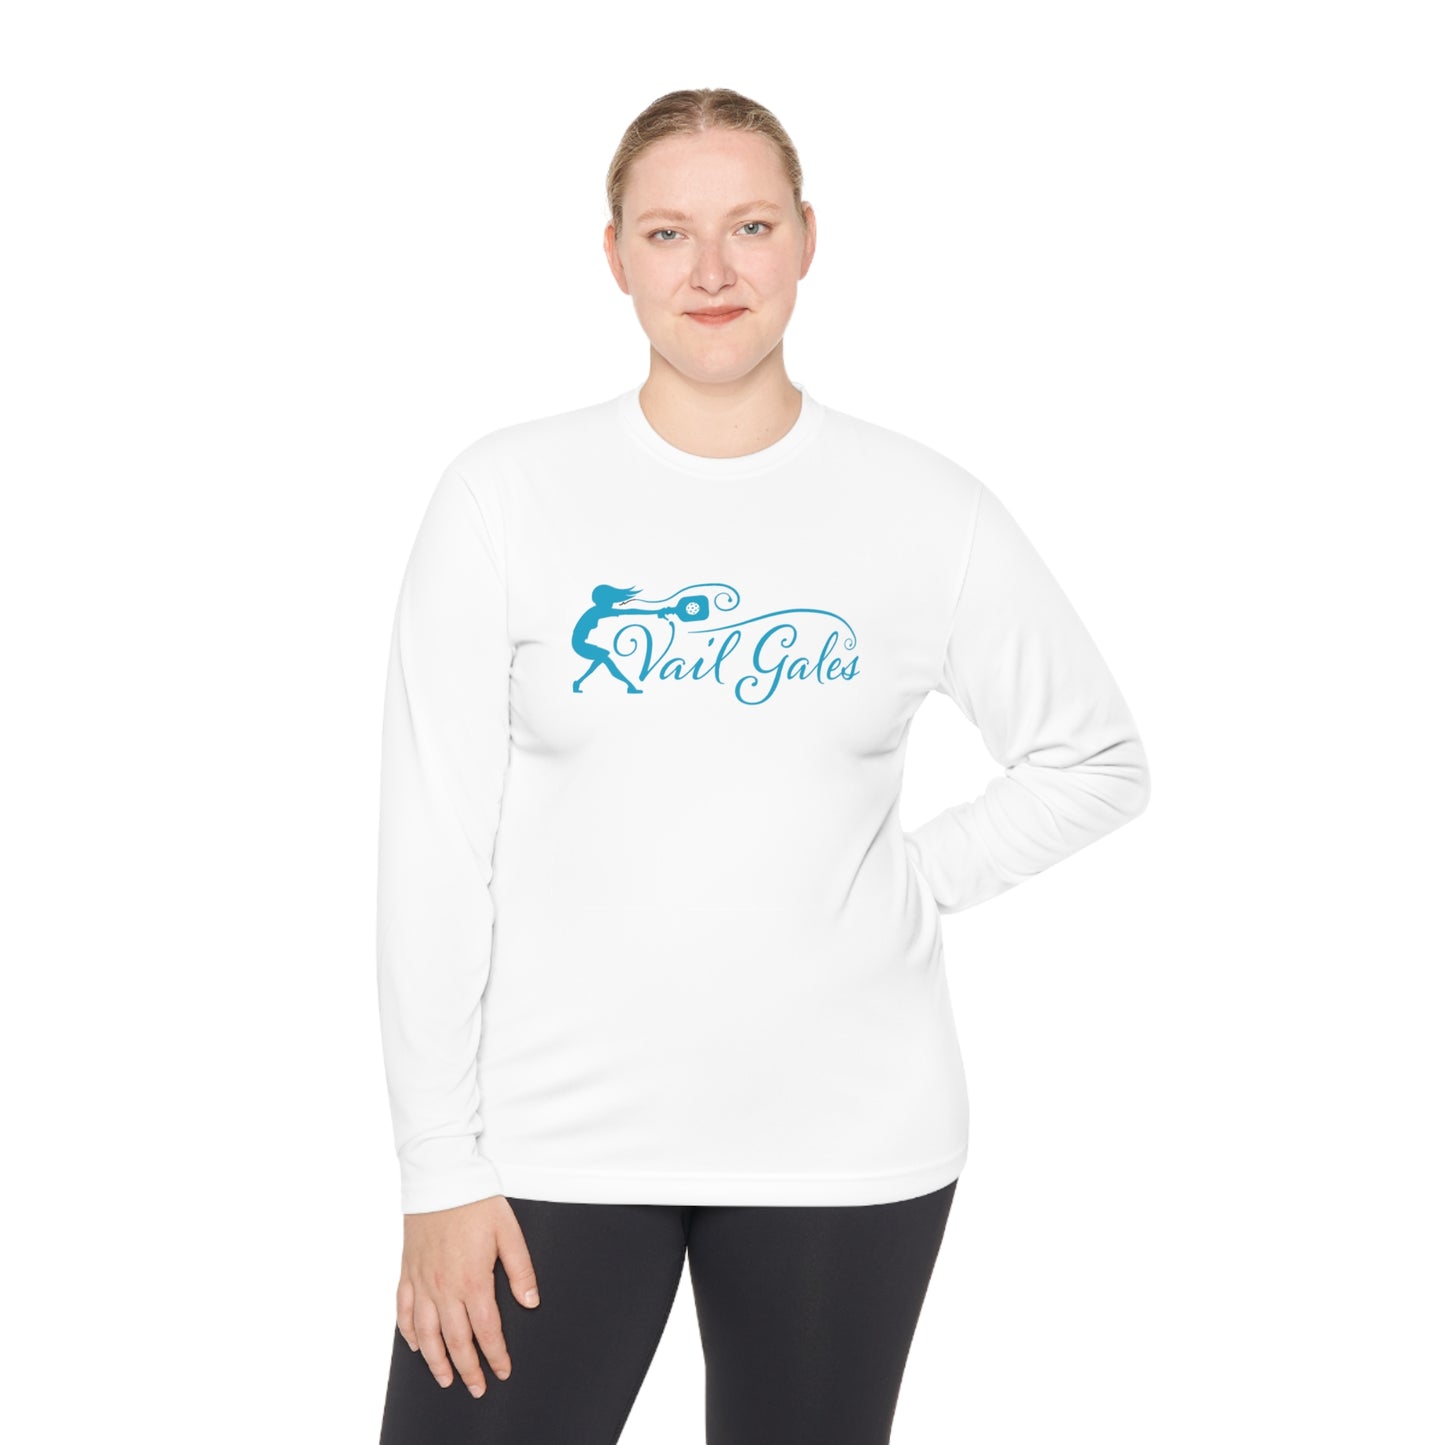 Vail Gales -Unisex Moisture Wicking SPF 40 Long Sleeve